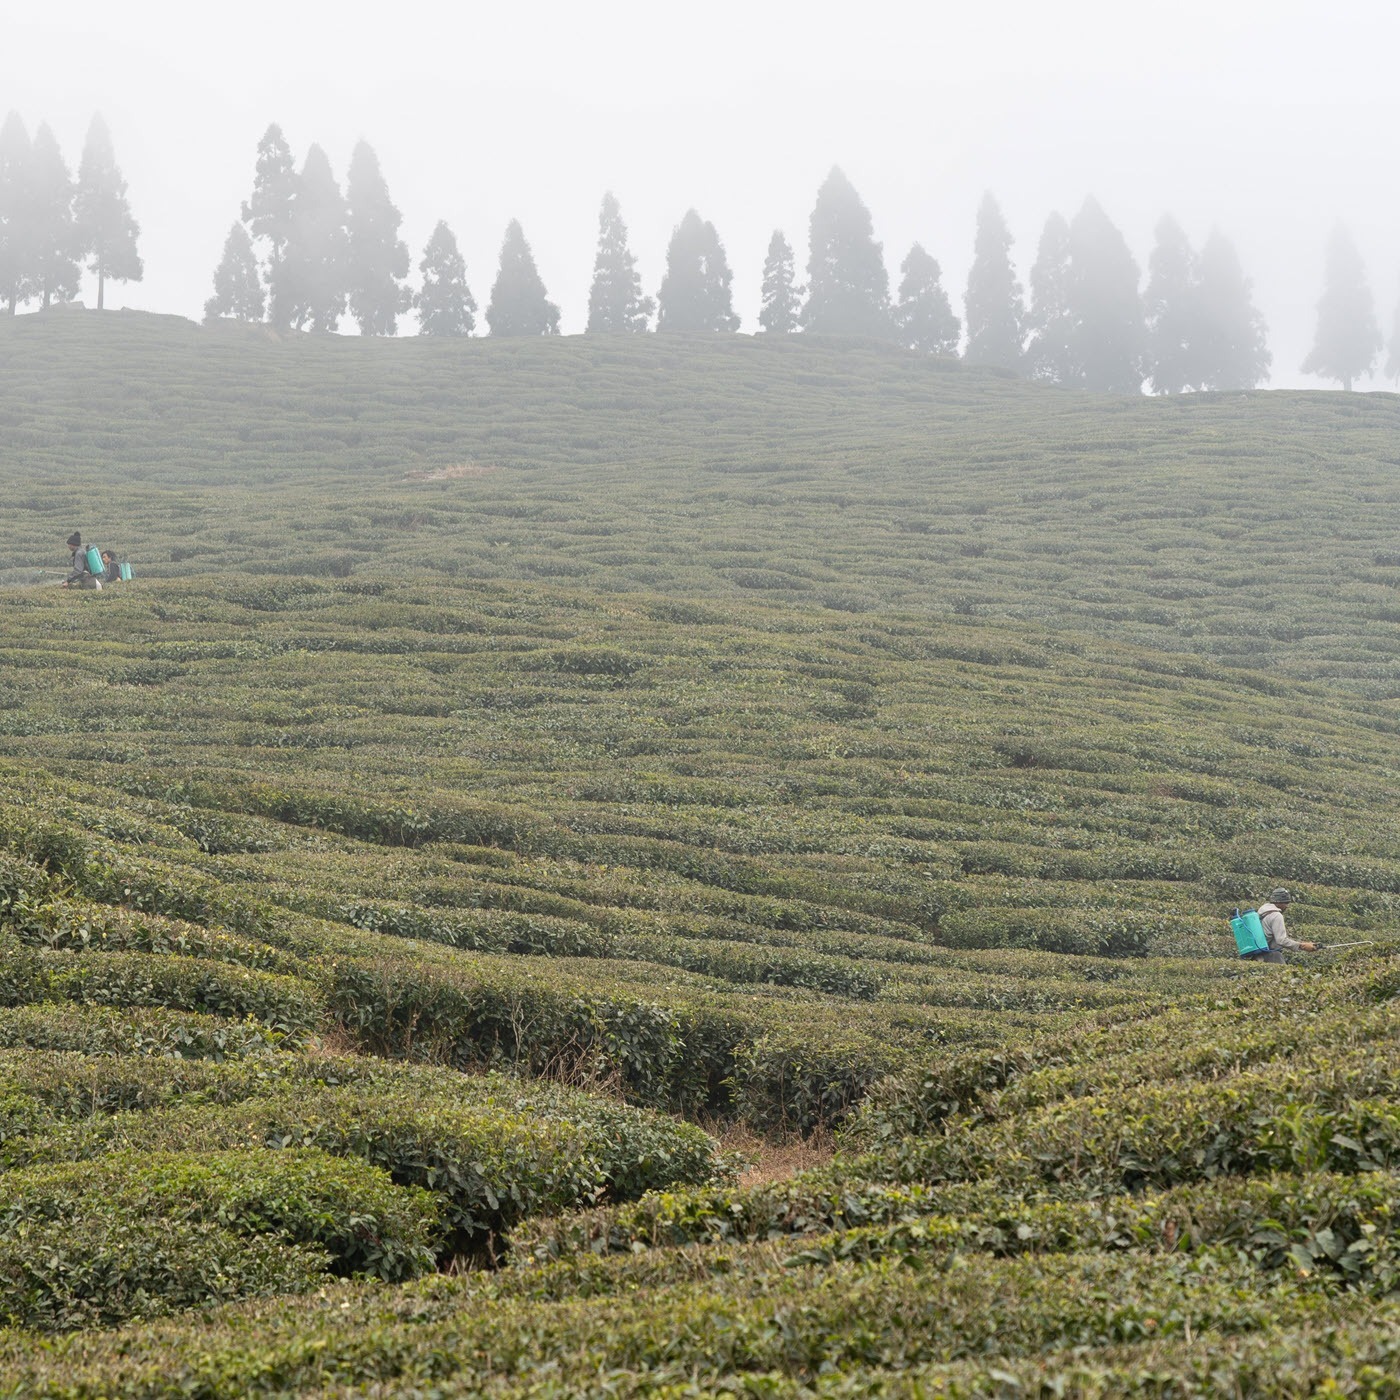 India Tea News |  Bought Leaf Factories Blame India Tea Board For Non-Support of Food Safety Compliance Requirements | Weather Impacts Tea Crop in Assam's Barak Valley |